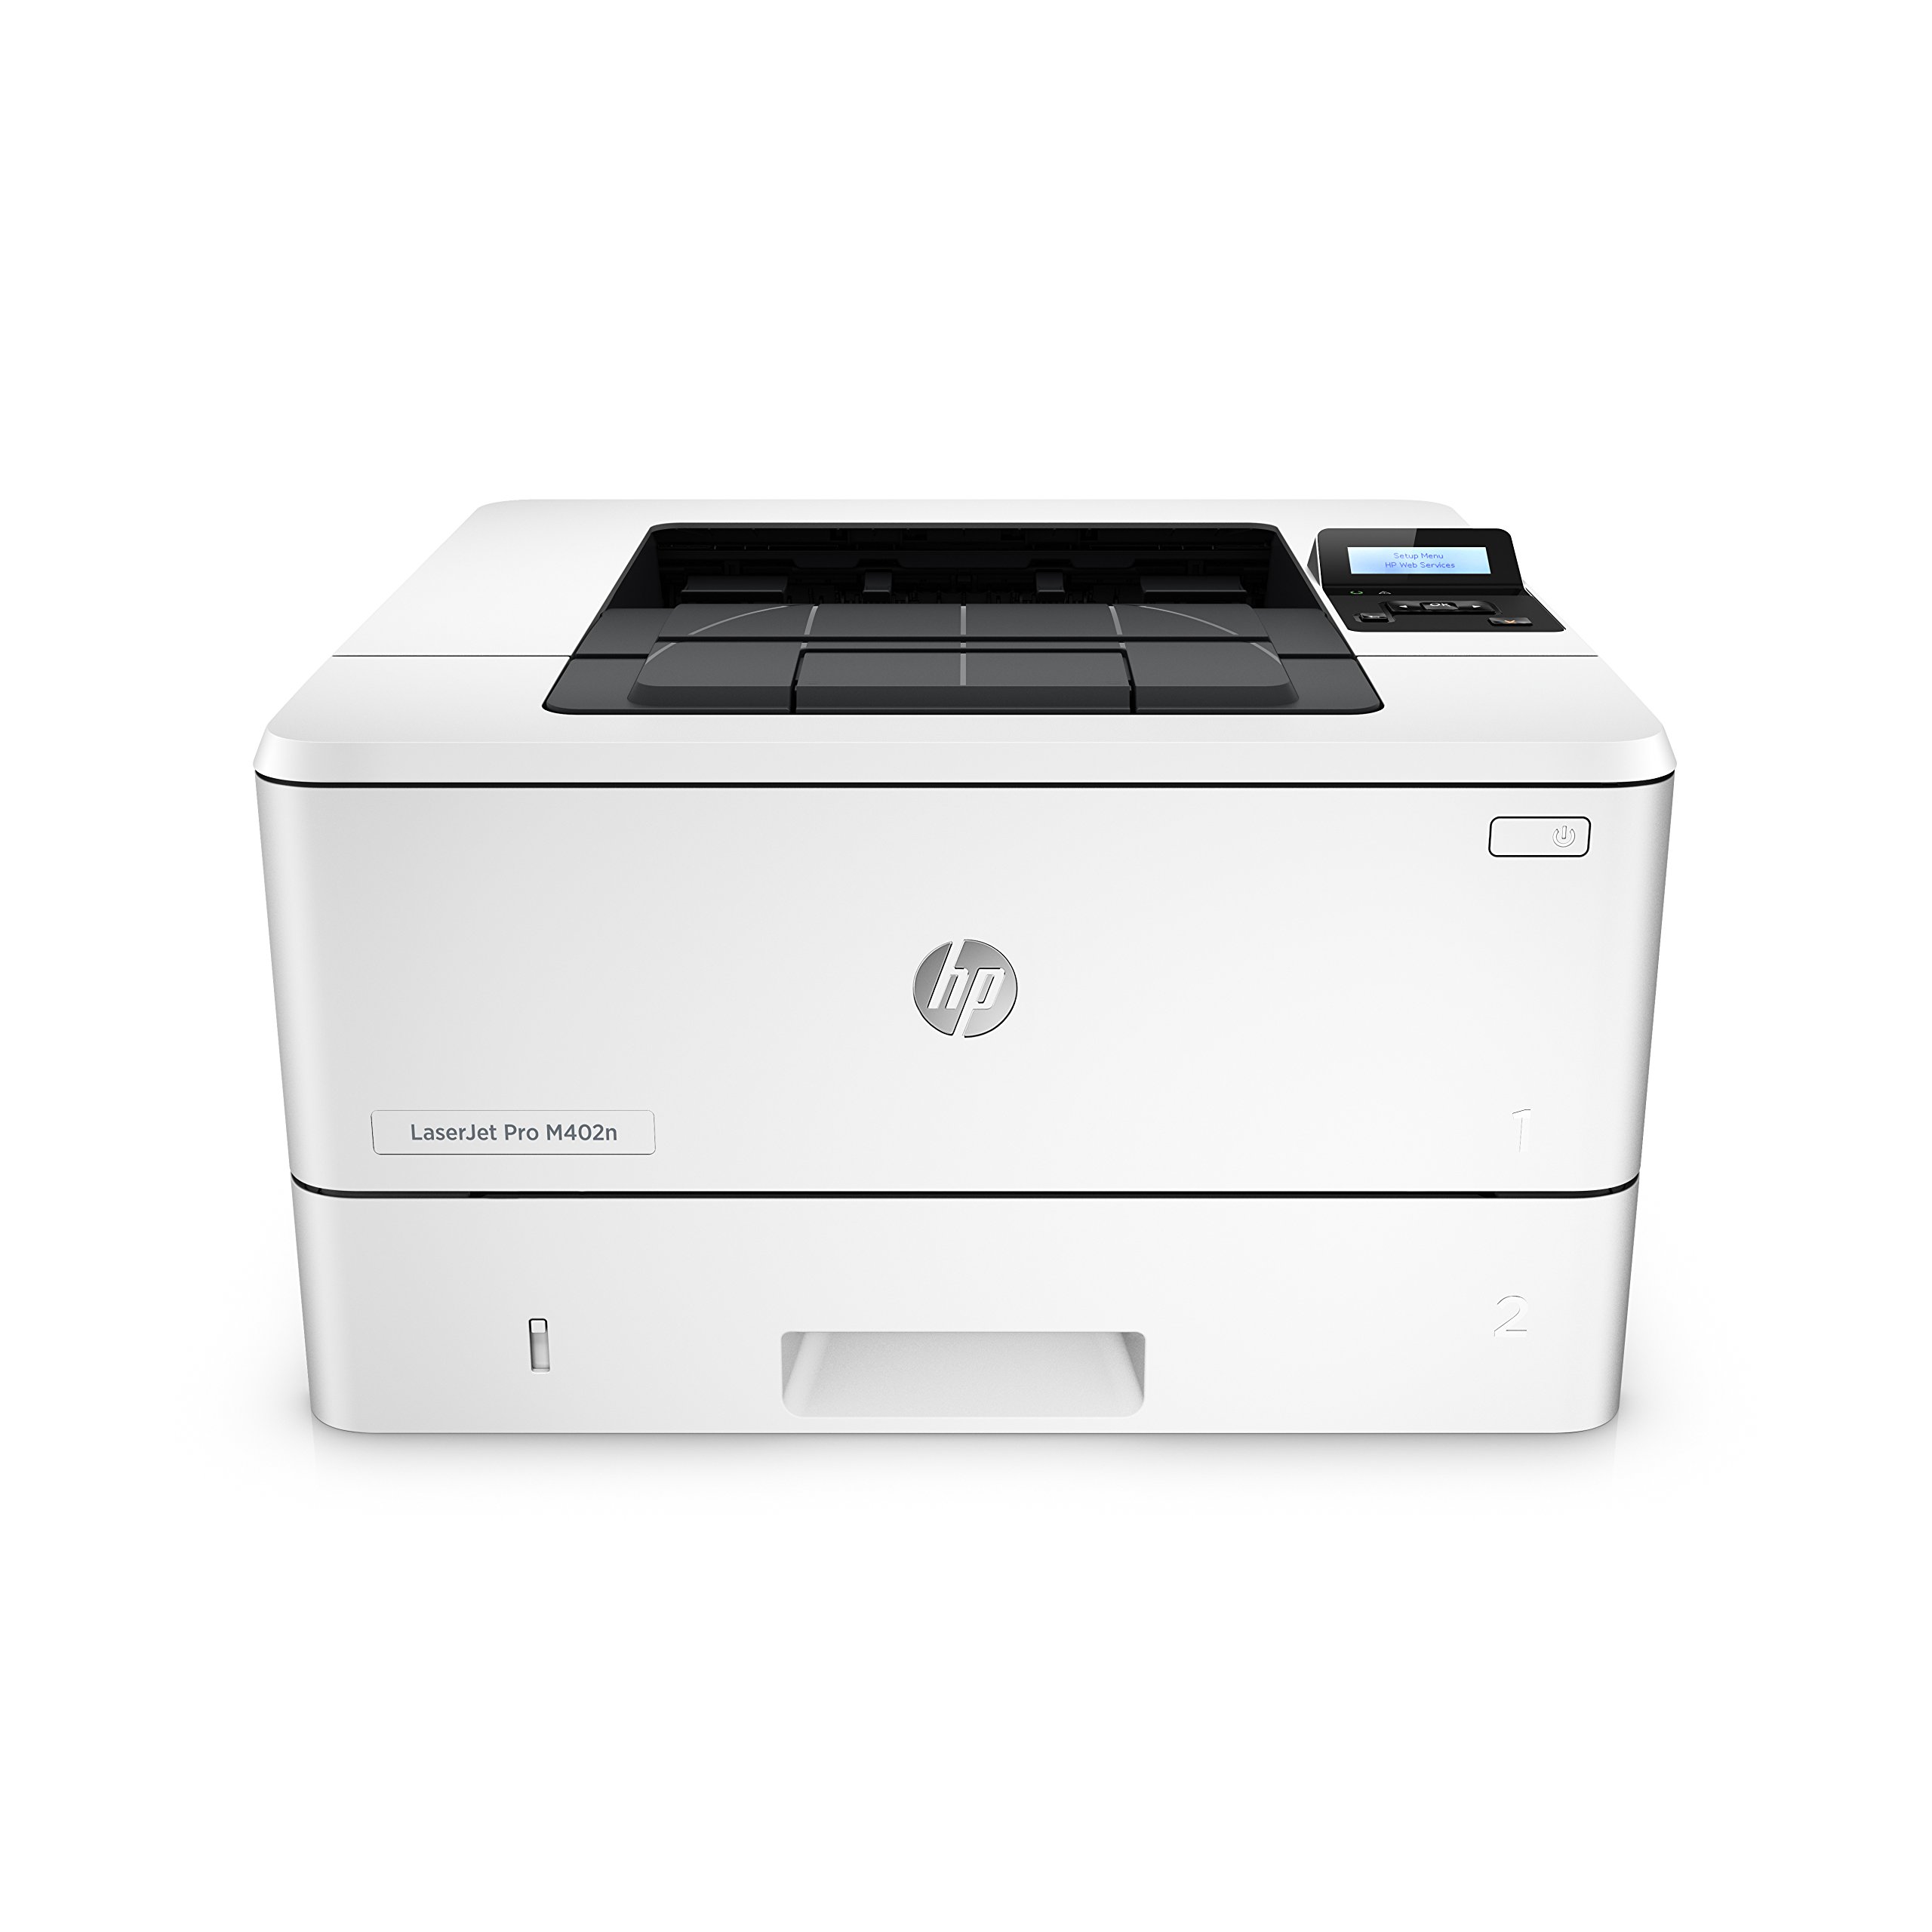 Book Cover HP LaserJet Pro M402n,Monochrome Laser Printer with Built-in Ethernet, Amazon Dash replenishment ready (C5F93A) M402n Printer